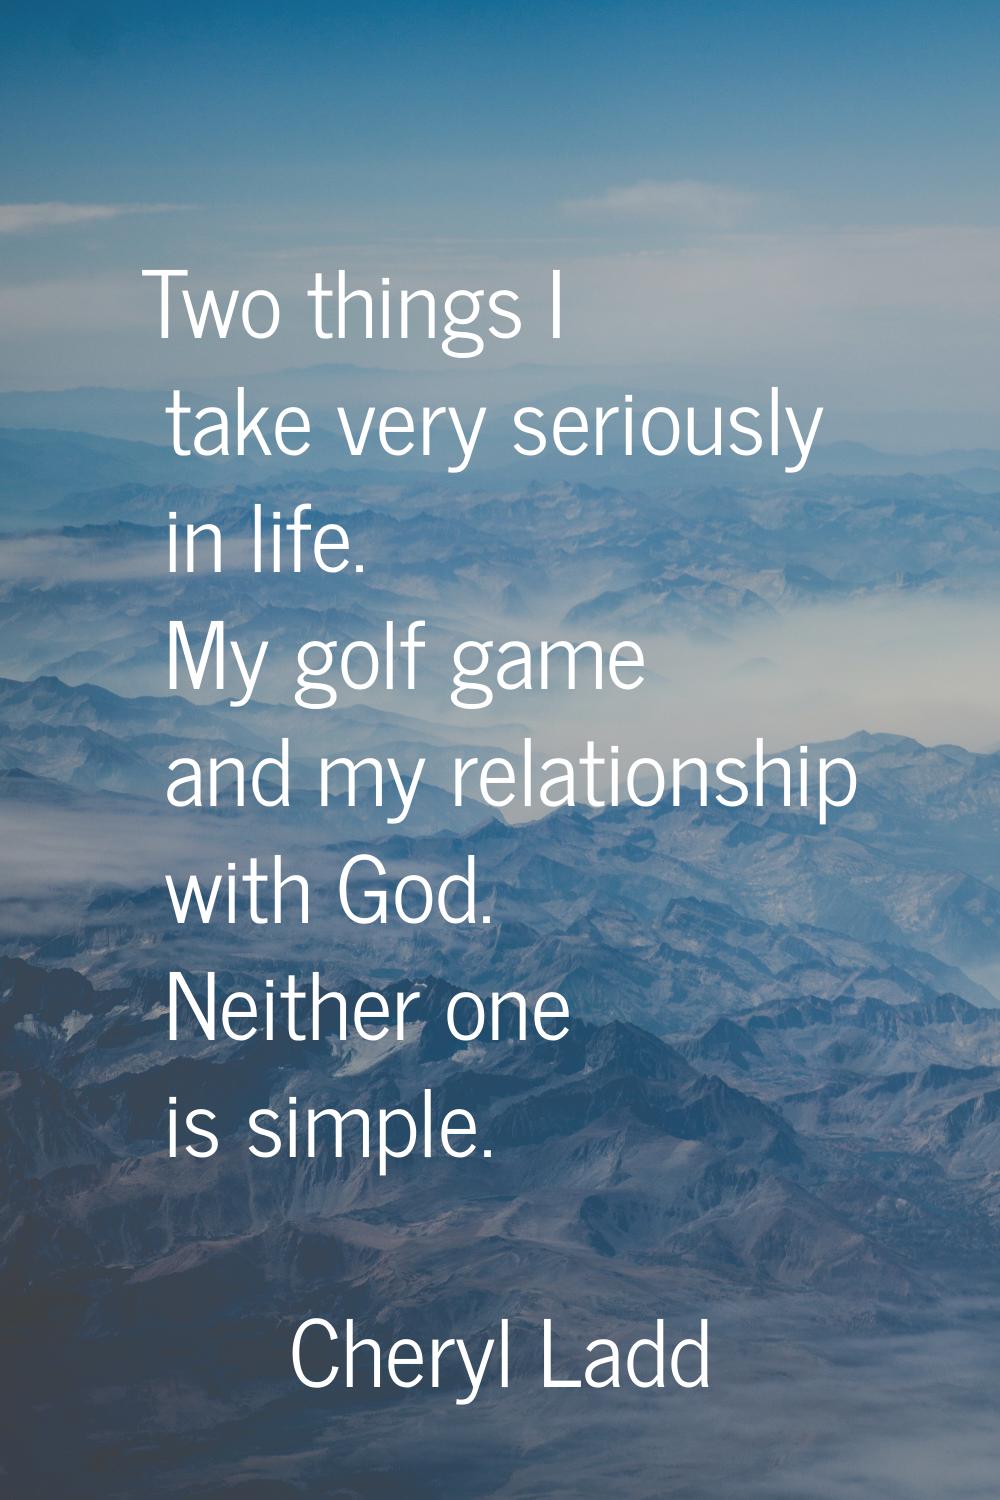 Two things I take very seriously in life. My golf game and my relationship with God. Neither one is